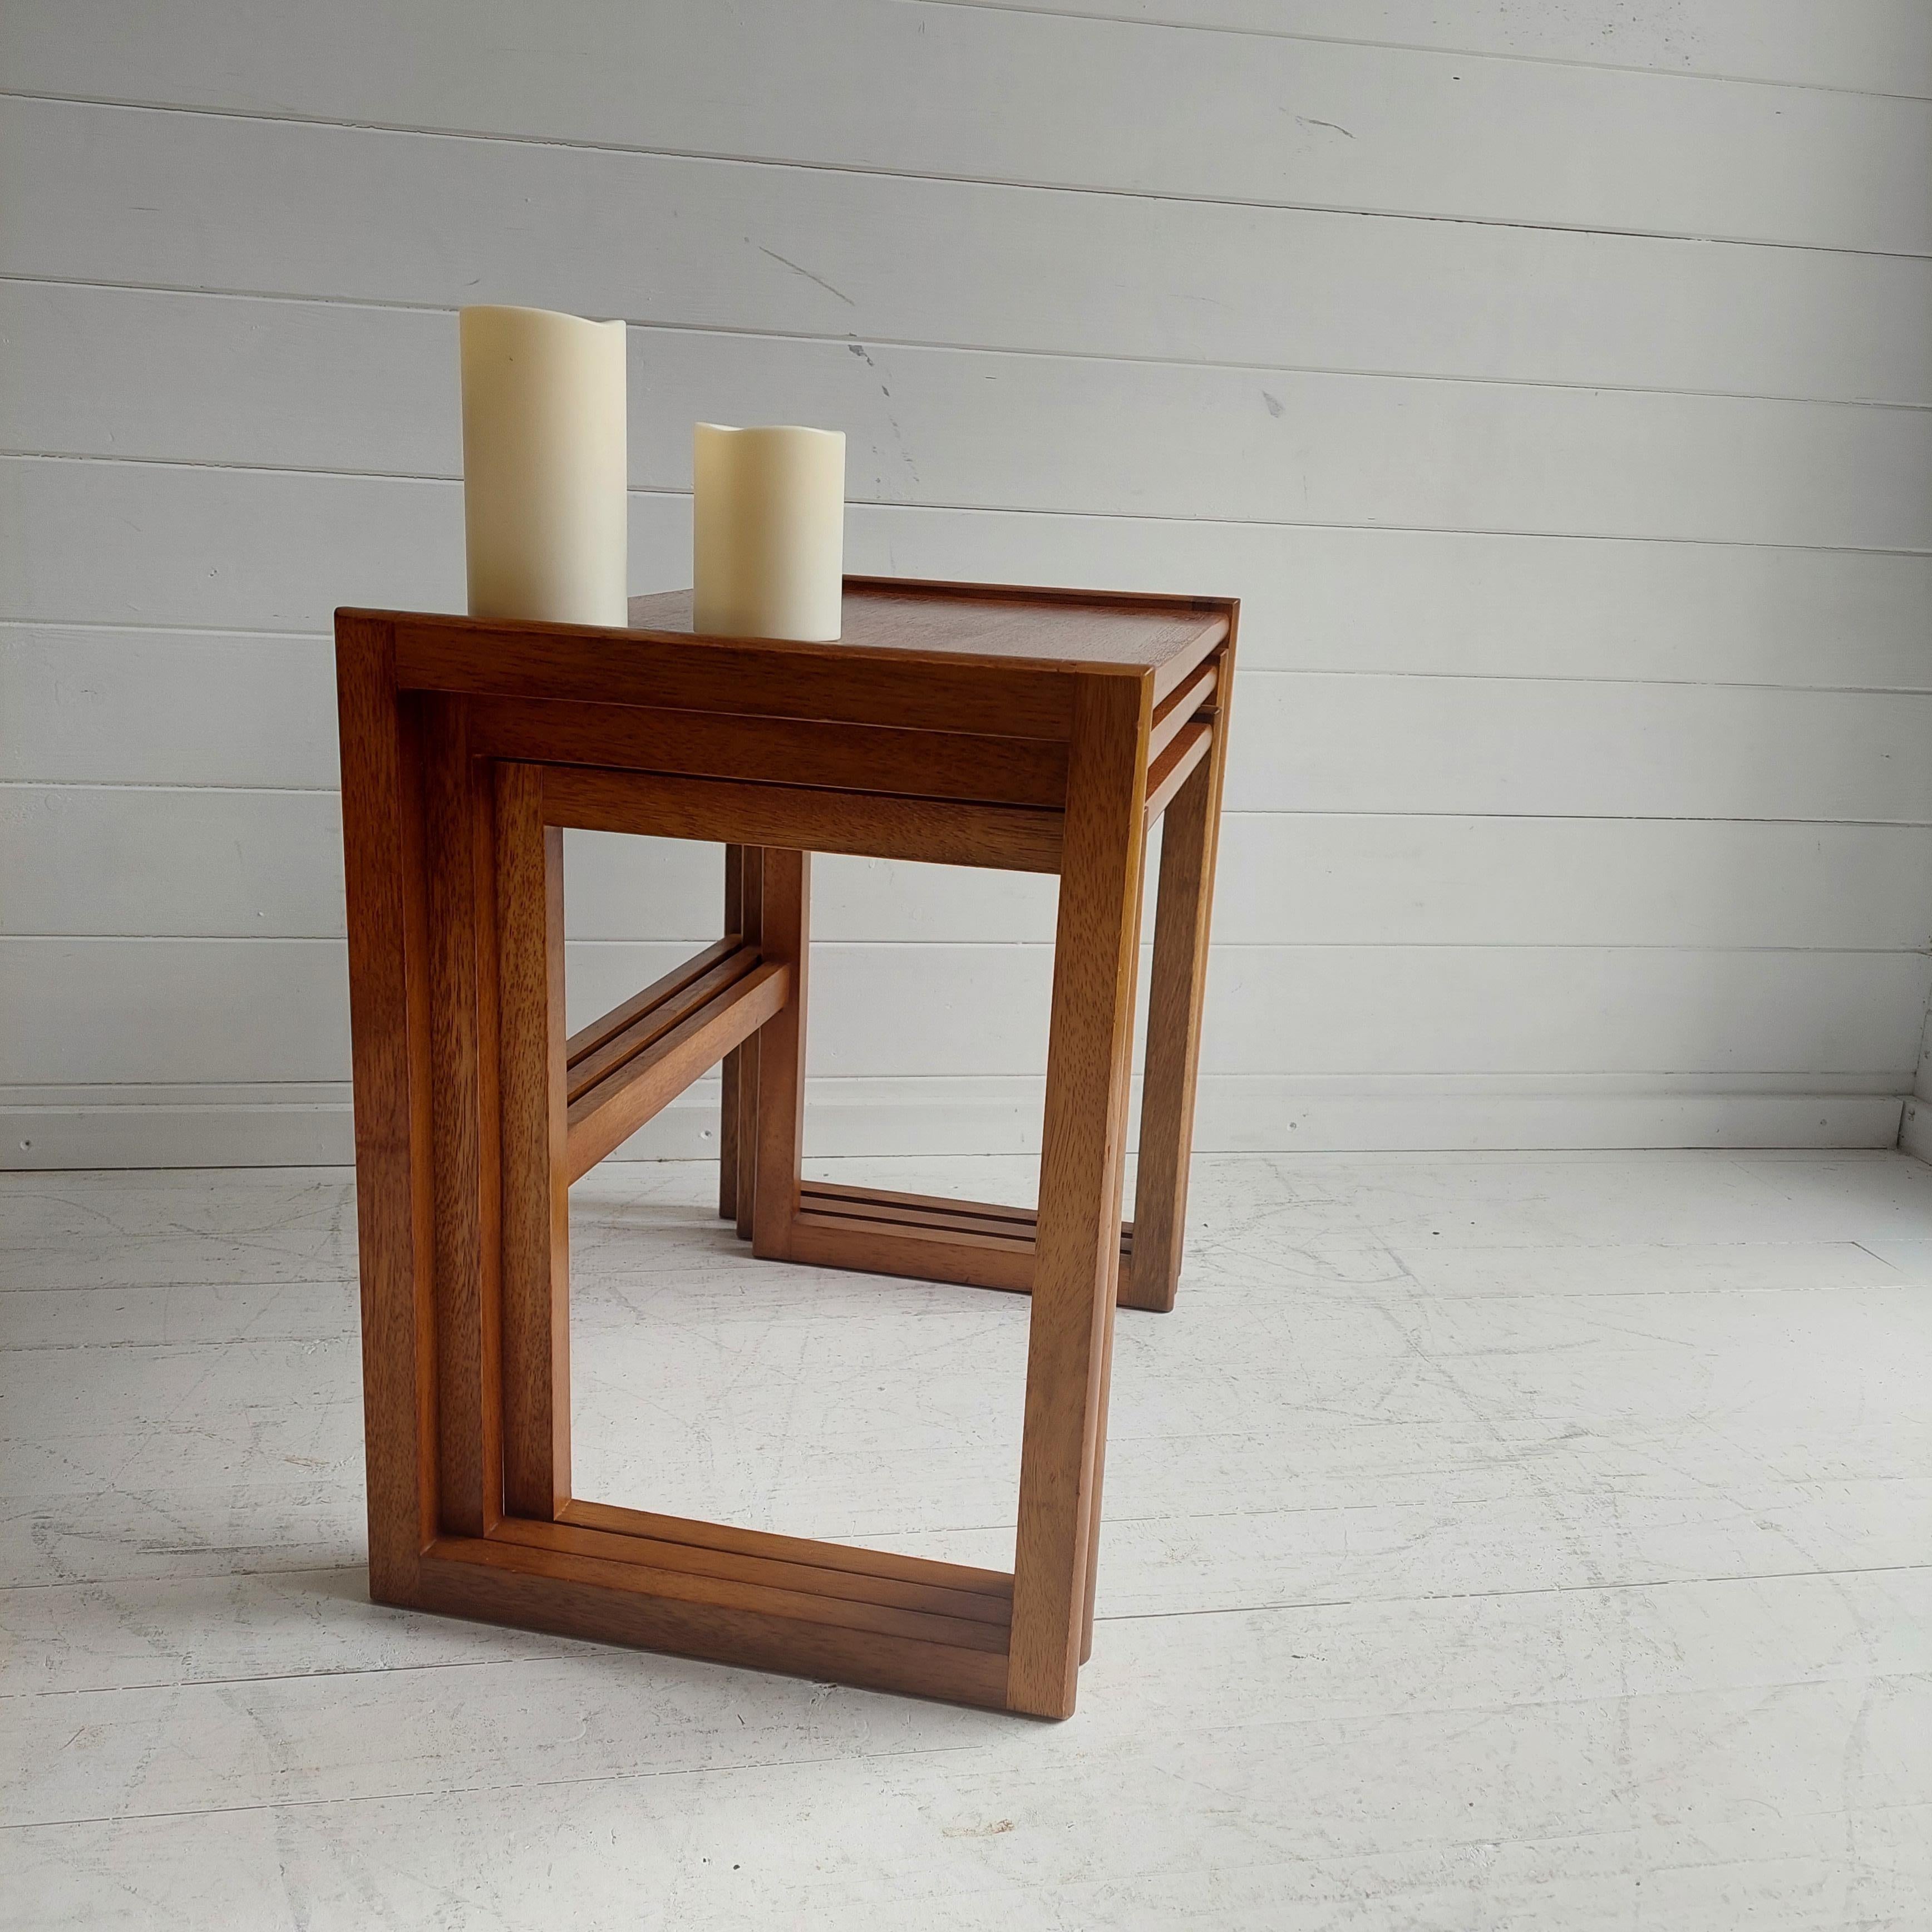 G-awesome! This beautiful set of side tables  very simliar to the G-plan design  

Executed in beautiful teak wood and special because of the wooden joints of the legs and the austere minimalistic design. 
Originates from England, 60s.
Inspired by